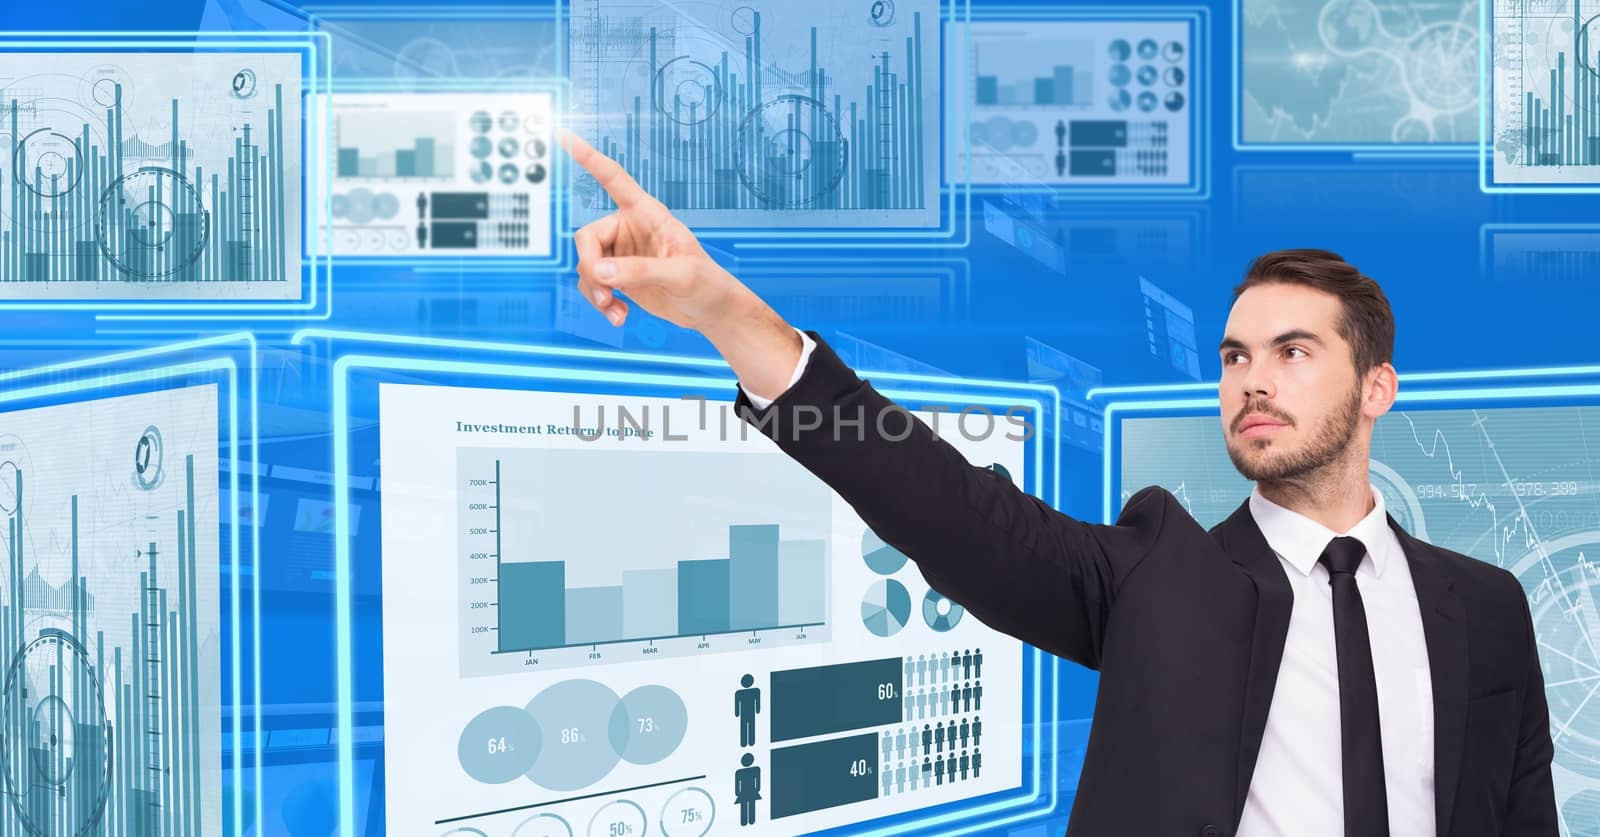 Digital composite of Businessman touching and interacting with technology interface panels